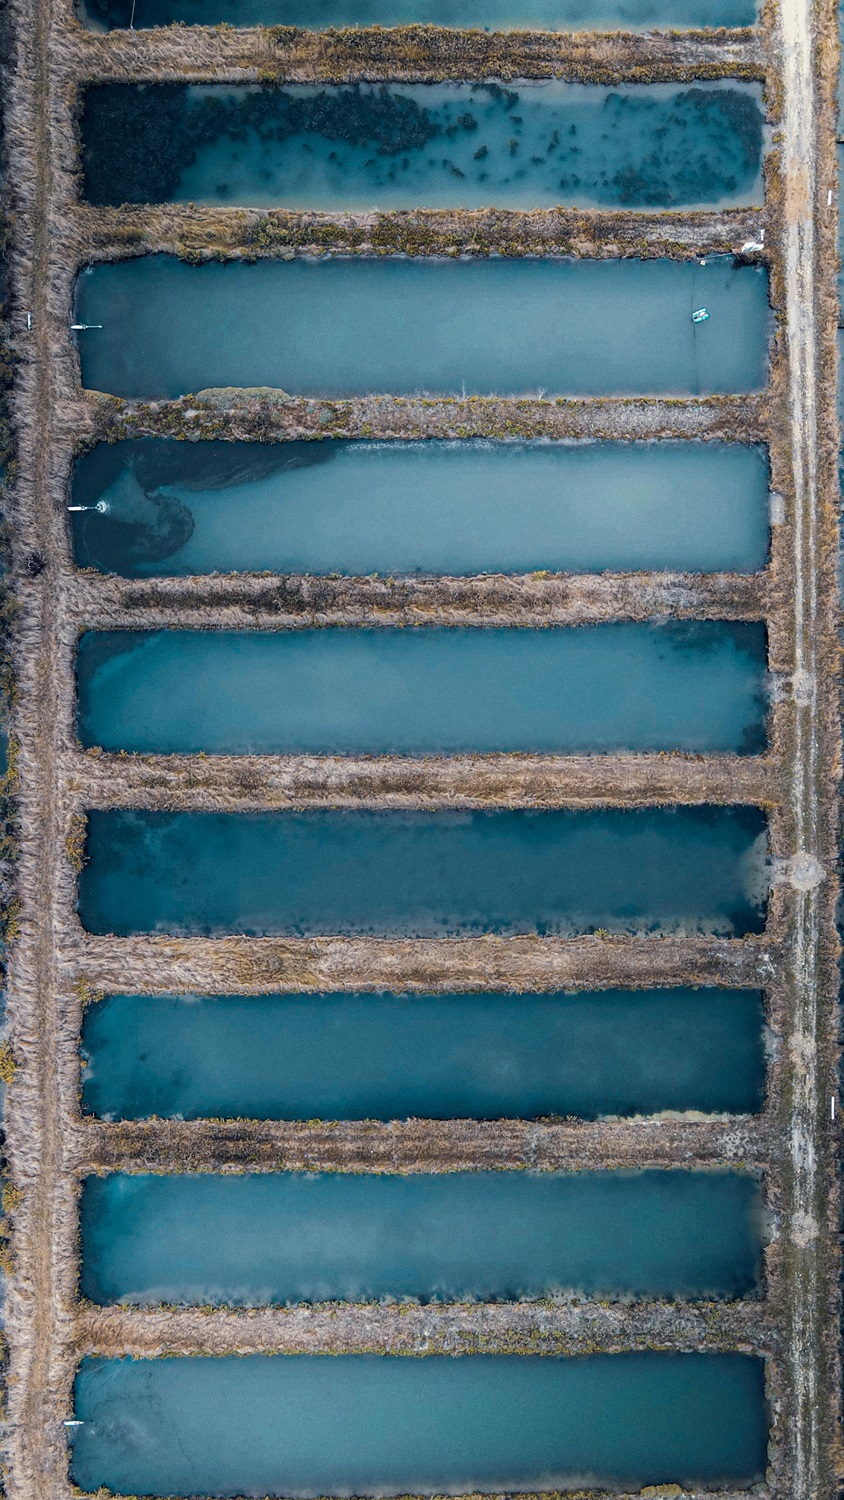 Overhead view of a fish farm